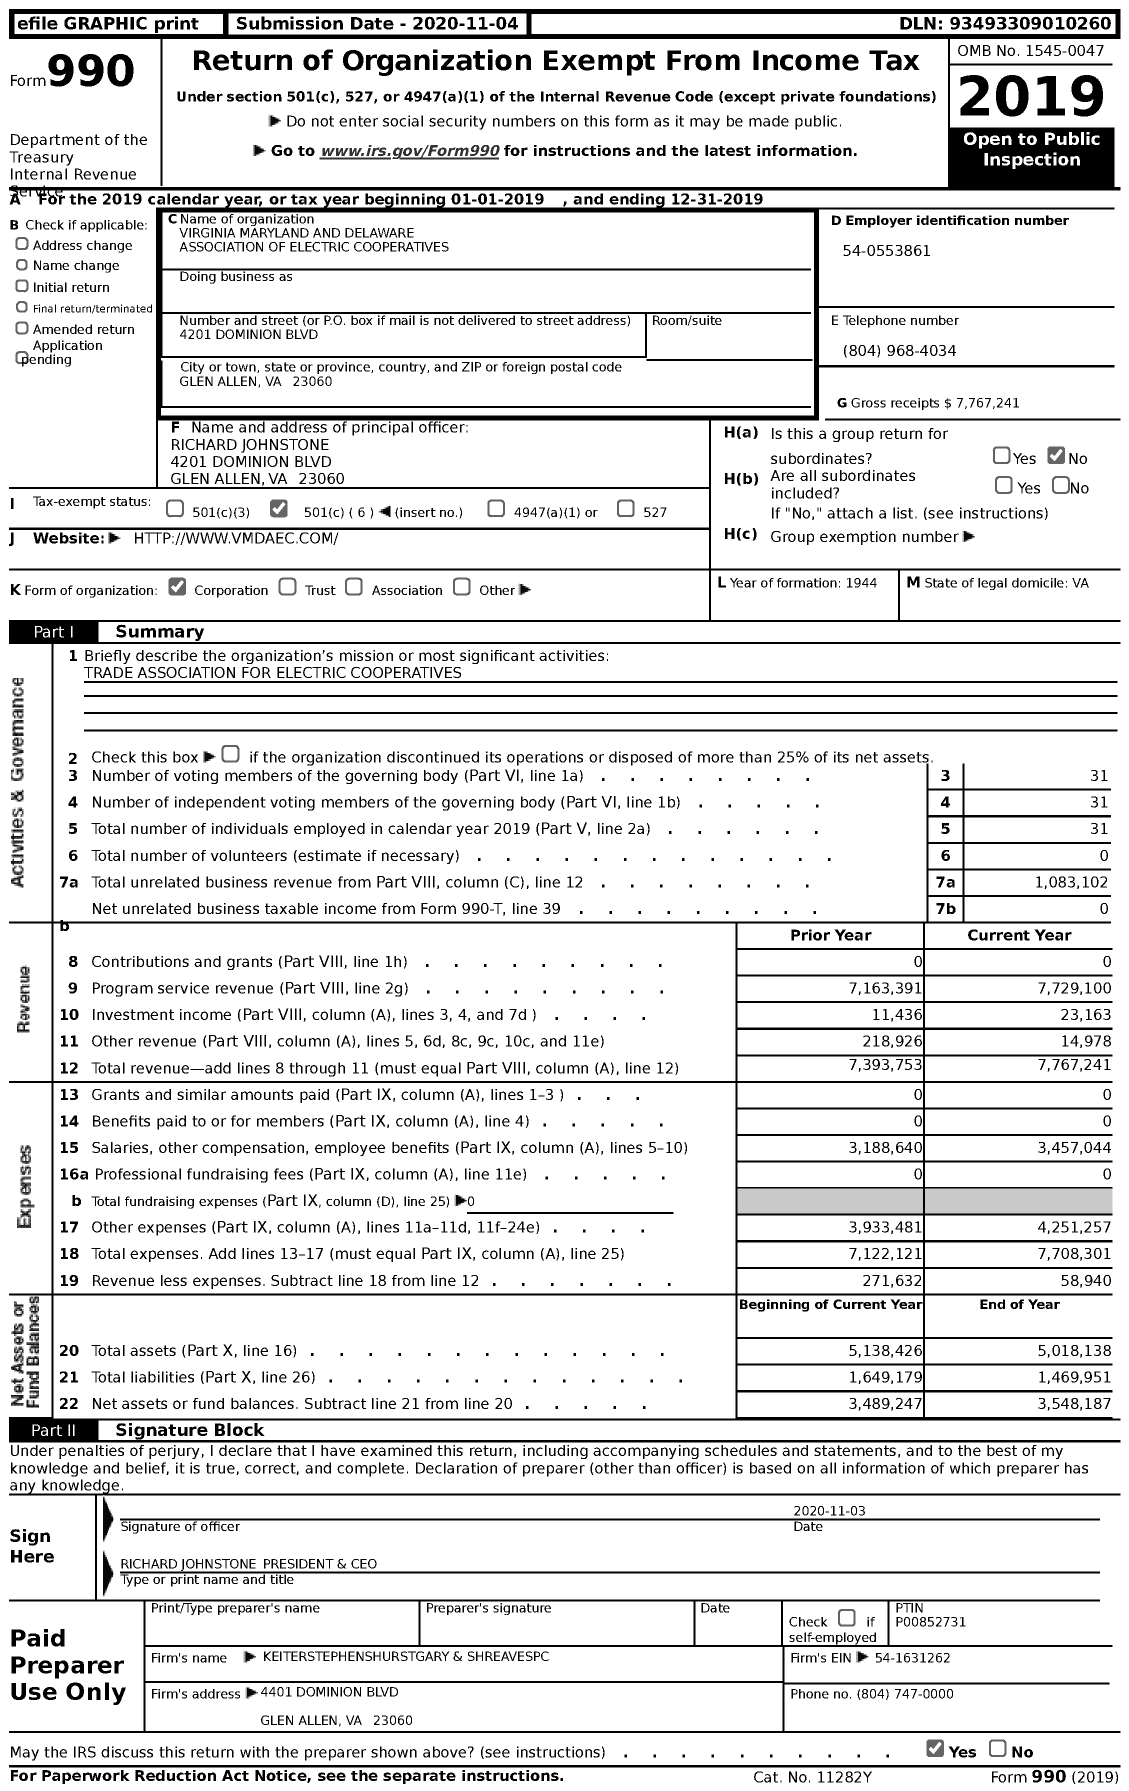 Image of first page of 2019 Form 990 for Virginia Maryland Delaware Association of Electric Cooperative (VMDAEC)